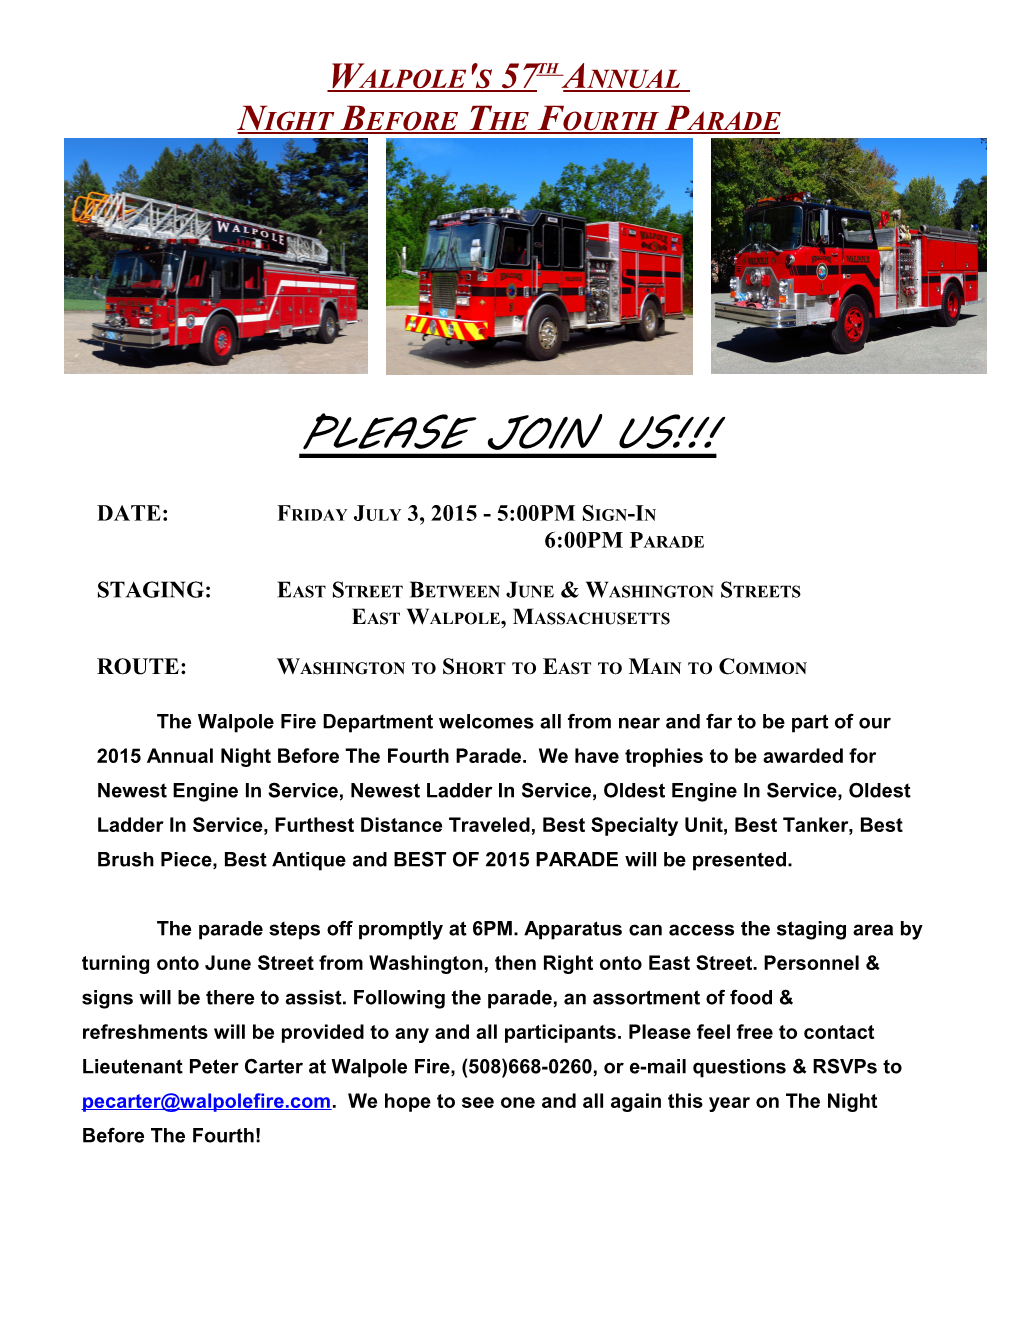 Franklin Fire Parade Committee